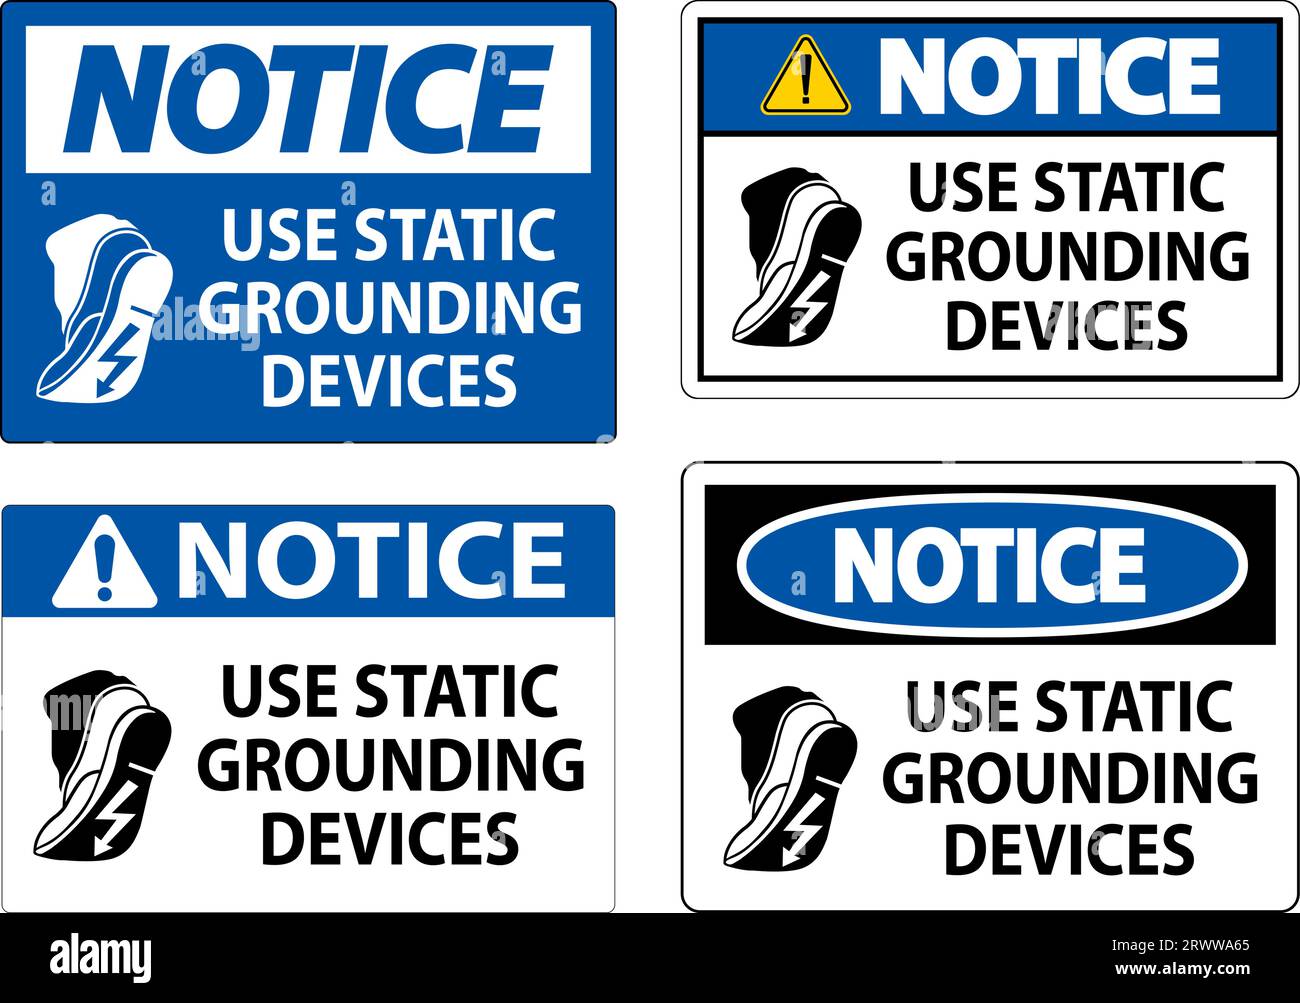 Notice Sign Use Static Grounding Devices Stock Vector